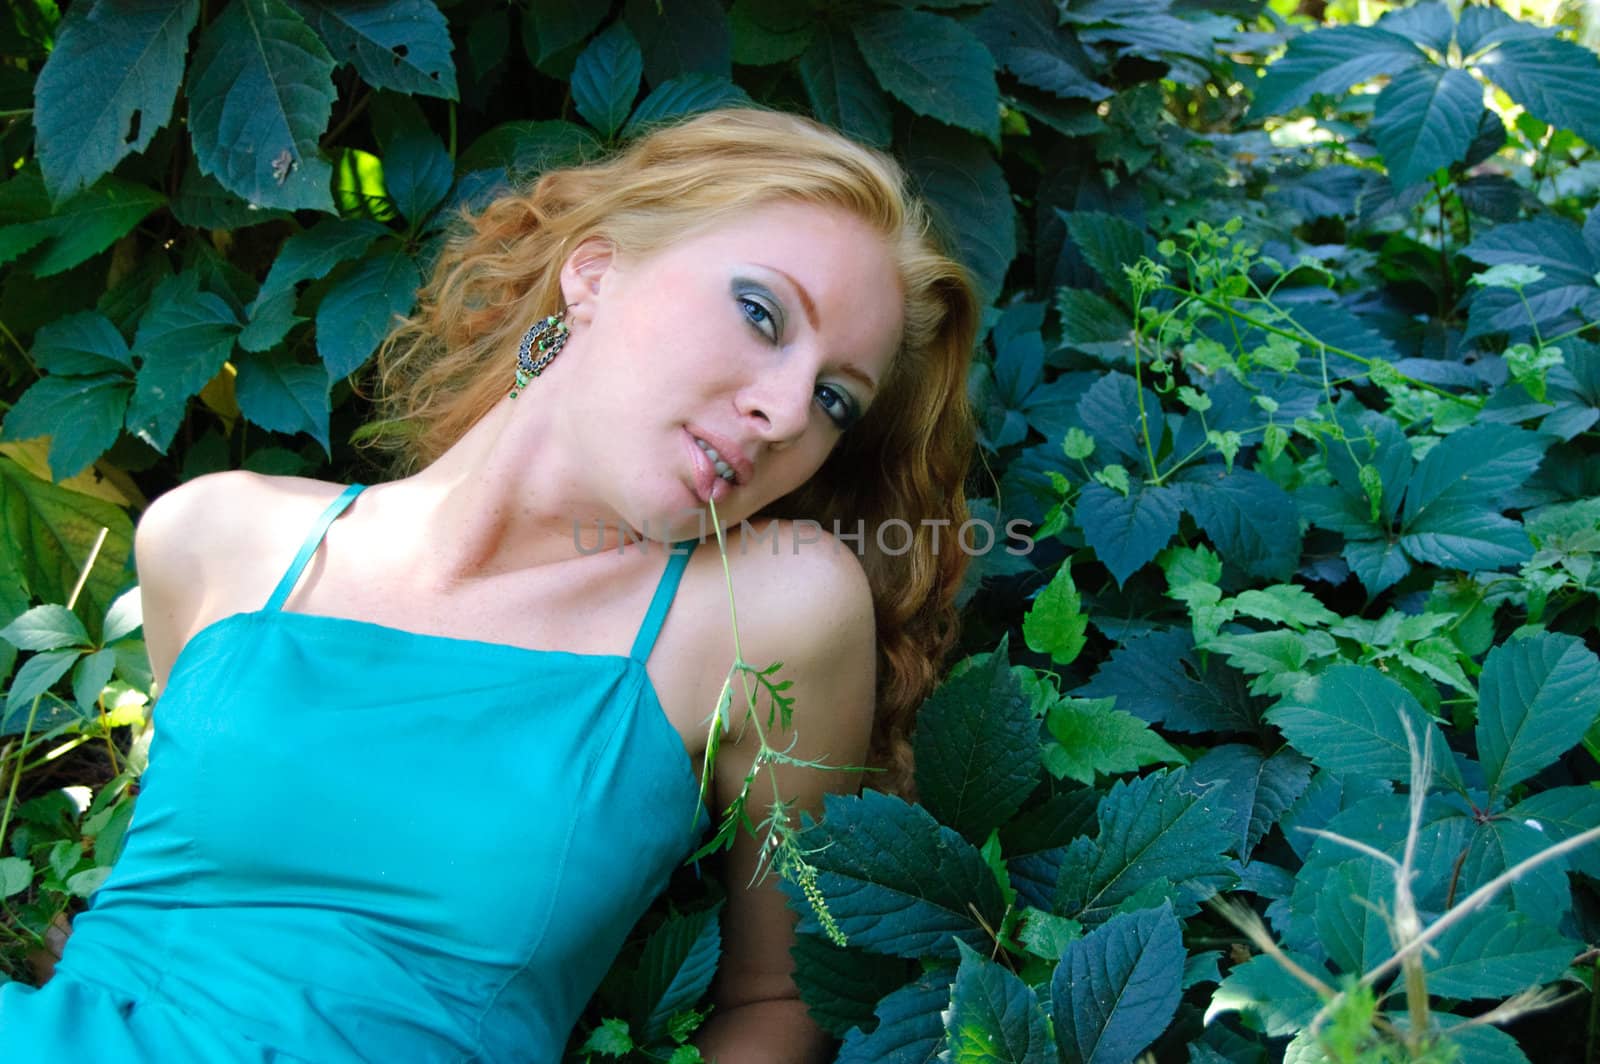 Lady lying on grass by Angel_a